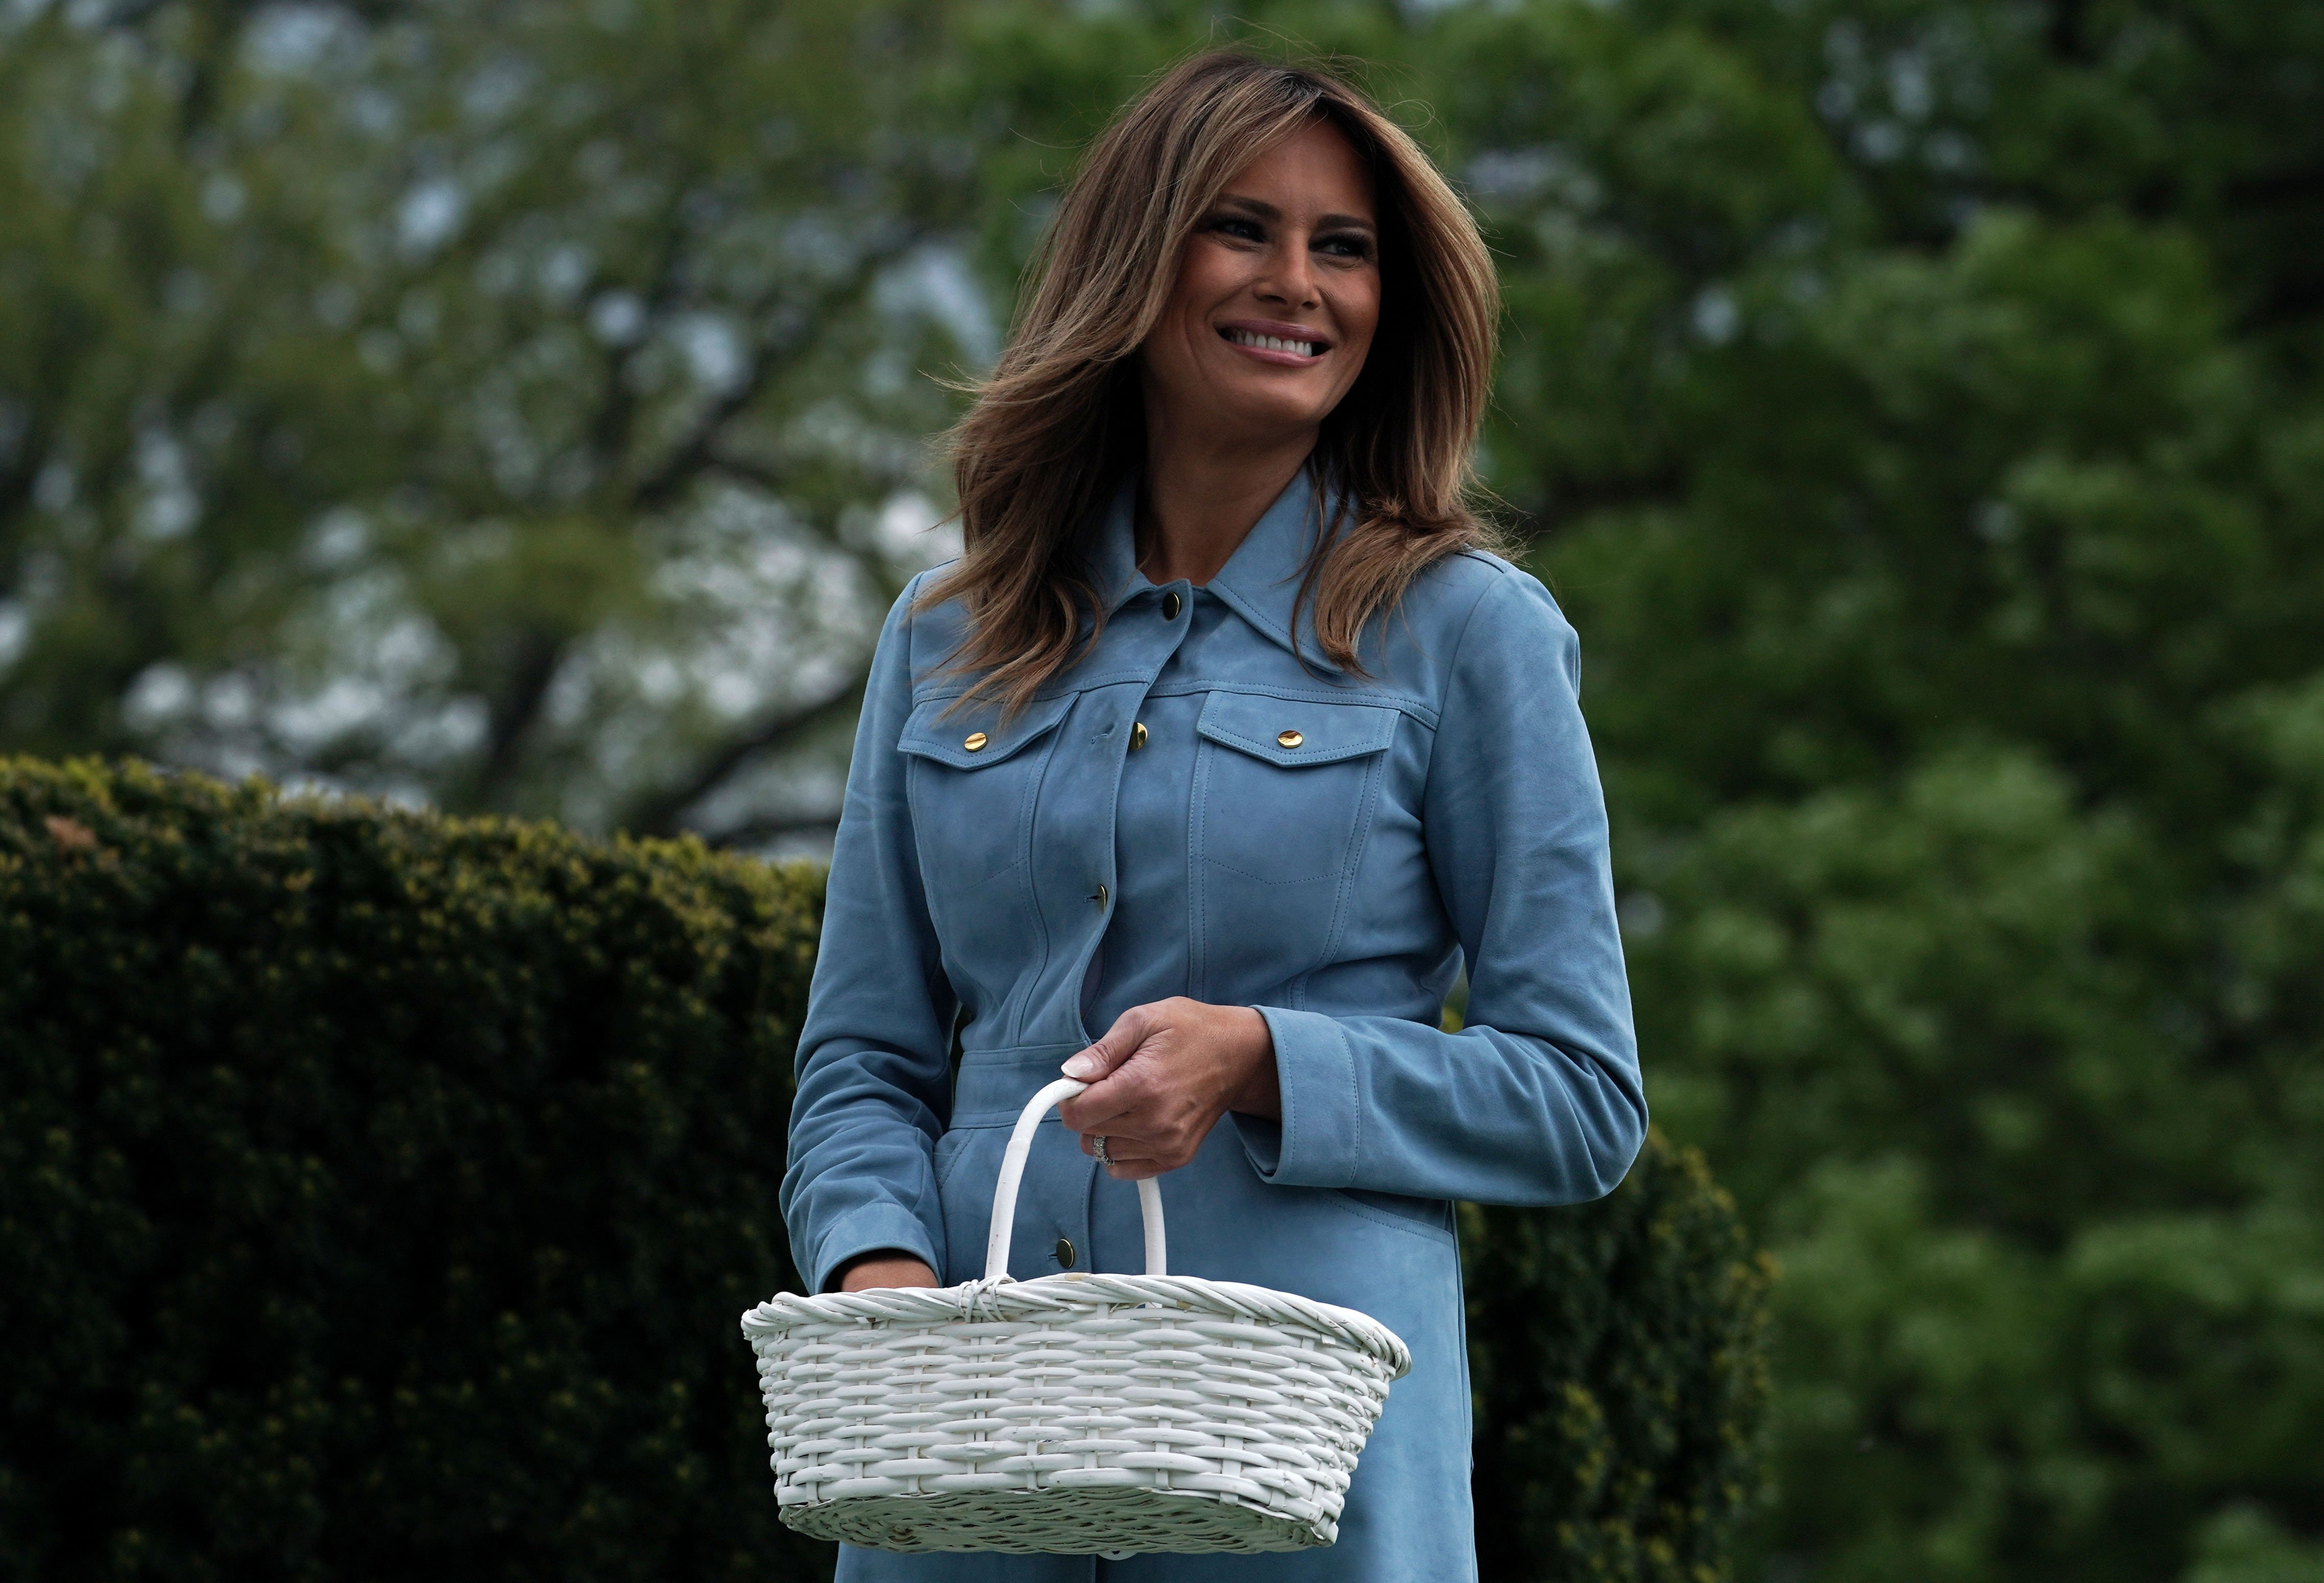 Melania Trump at the annual Easter Egg Roll in April 2019 | Photo: Getty Images